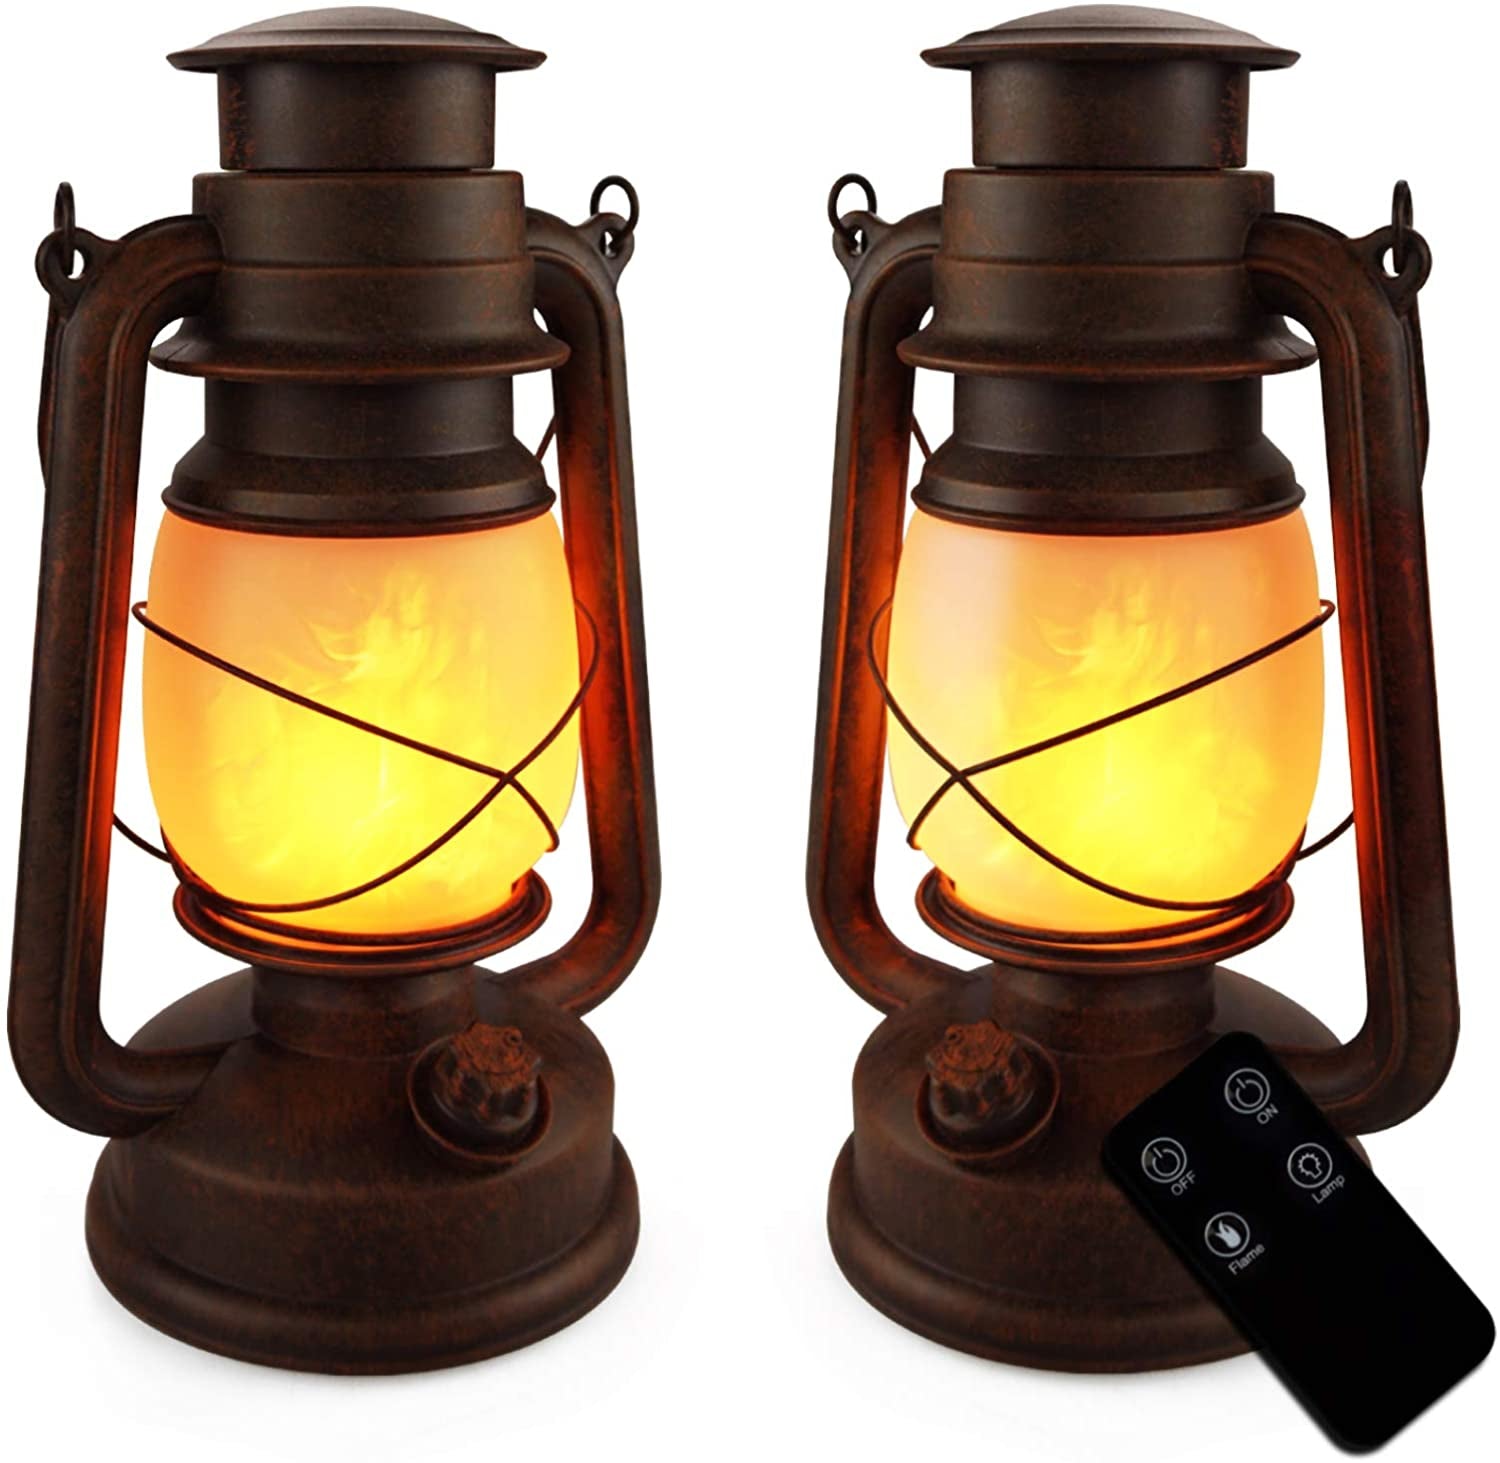 TOFU, LED Vintage Lantern Battery Operated Flickering Flame Outdoor Hanging Lantern with Remote and Two Modes for Camping and Home Decor, 2 Pack